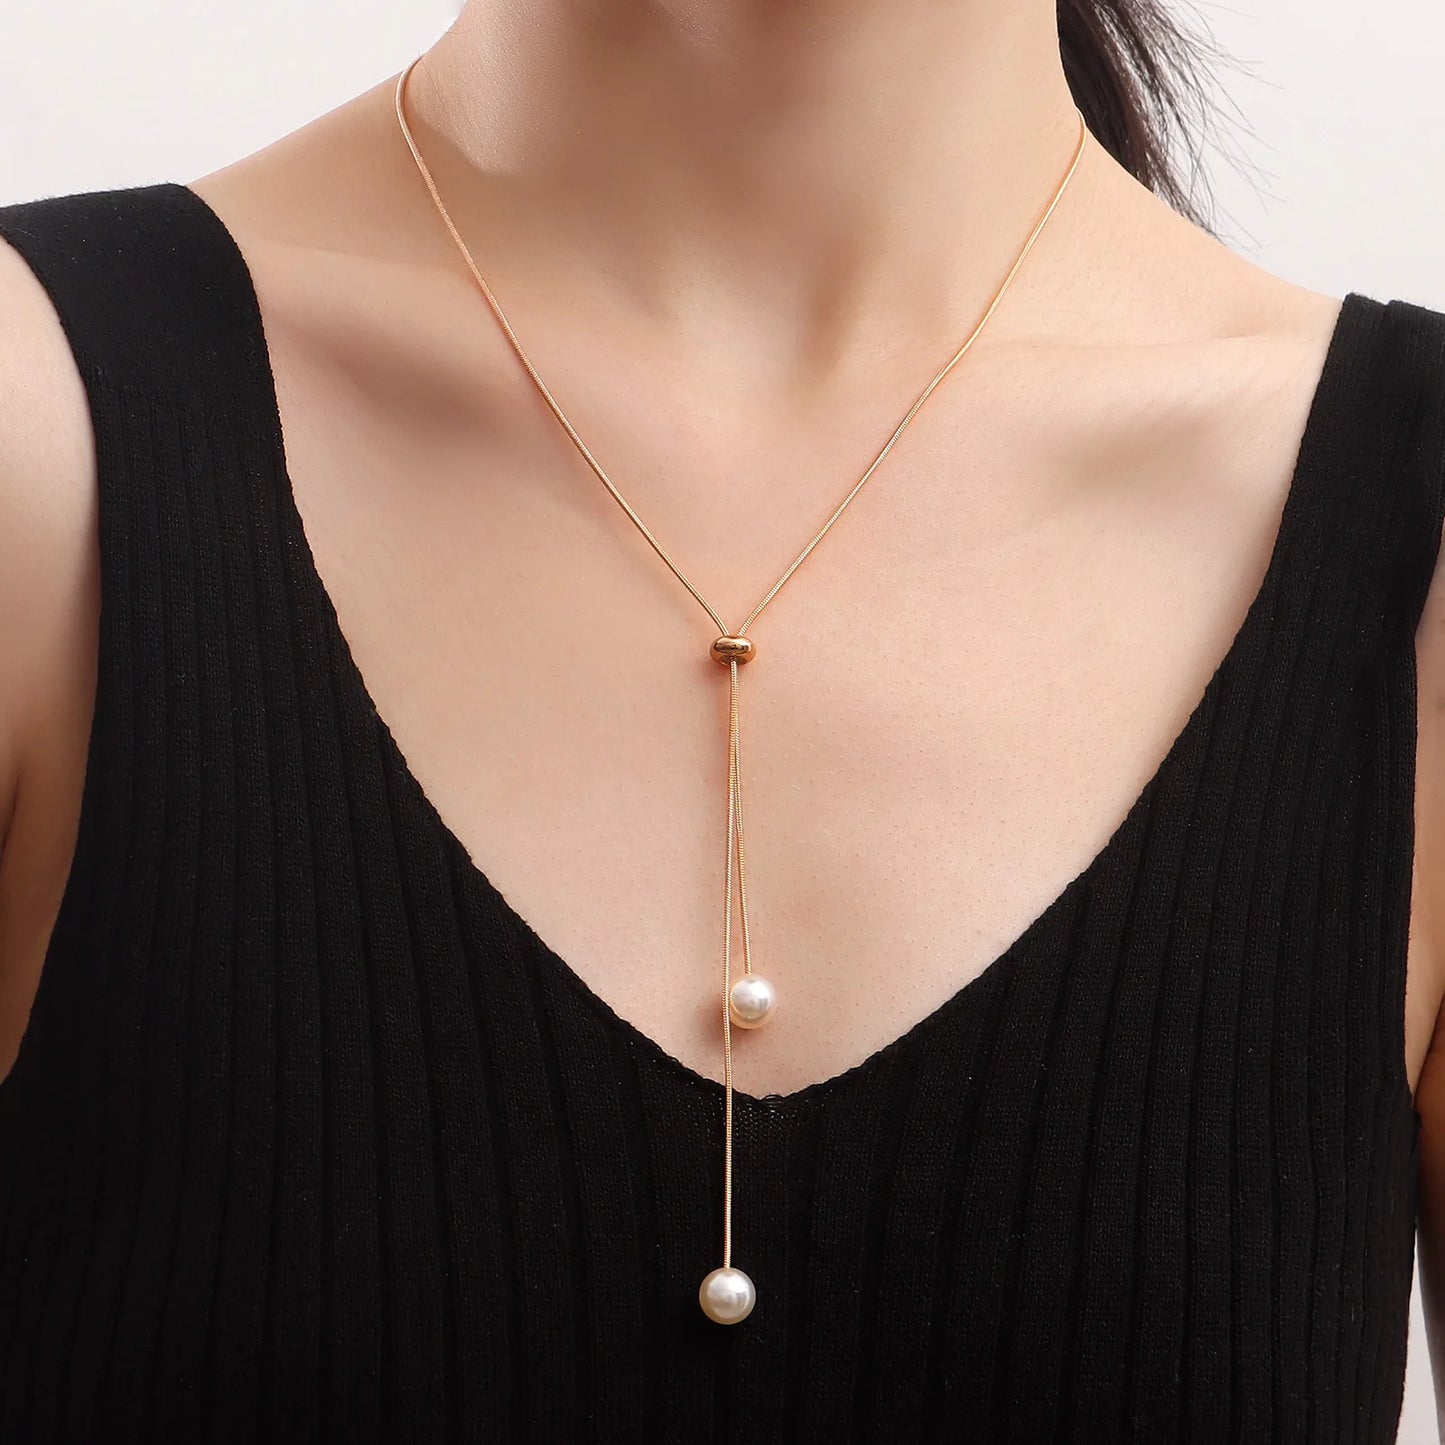 Fashion Simple Gold Color Pearl Necklaces for Women Long Tassel Pull Design Clavicle Chains Necklace Jewelry Collares